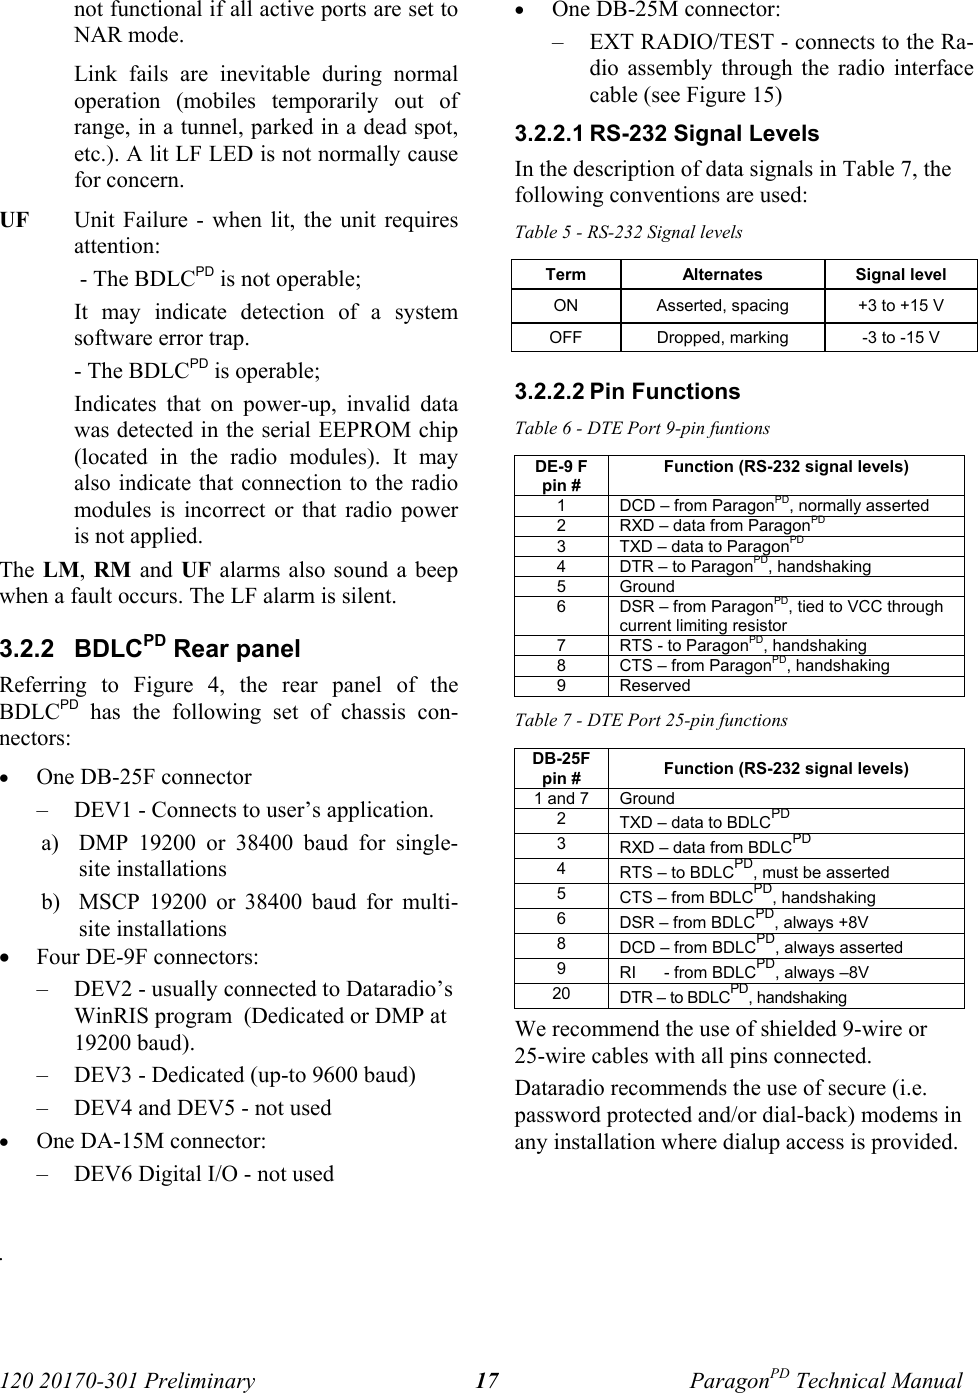 120 20170-301 Preliminary ParagonPD Technical Manual17not functional if all active ports are set toNAR mode.Link fails are inevitable during normaloperation (mobiles temporarily out ofrange, in a tunnel, parked in a dead spot,etc.). A lit LF LED is not normally causefor concern.UF Unit Failure - when lit, the unit requiresattention: - The BDLCPD is not operable; It may indicate detection of a systemsoftware error trap. - The BDLCPD is operable;Indicates that on power-up, invalid datawas detected in the serial EEPROM chip(located in the radio modules). It mayalso indicate that connection to the radiomodules is incorrect or that radio poweris not applied.The LM, RM and UF alarms also sound a beepwhen a fault occurs. The LF alarm is silent.3.2.2  BDLCPD Rear panelReferring to Figure 4, the rear panel of theBDLCPD has the following set of chassis con-nectors: • One DB-25F connector– DEV1 - Connects to user’s application.a) DMP 19200 or 38400 baud for single-site installations b) MSCP 19200 or 38400 baud for multi-site installations• Four DE-9F connectors:– DEV2 - usually connected to Dataradio’sWinRIS program  (Dedicated or DMP at19200 baud).– DEV3 - Dedicated (up-to 9600 baud)– DEV4 and DEV5 - not used• One DA-15M connector:– DEV6 Digital I/O - not used • One DB-25M connector:– EXT RADIO/TEST - connects to the Ra-dio assembly through the radio interfacecable (see Figure 15)3.2.2.1 RS-232 Signal LevelsIn the description of data signals in Table 7, thefollowing conventions are used:Table 5 - RS-232 Signal levelsTerm Alternates Signal levelON Asserted, spacing +3 to +15 VOFF Dropped, marking -3 to -15 V3.2.2.2 Pin FunctionsTable 6 - DTE Port 9-pin funtionsDE-9 Fpin #Function (RS-232 signal levels)1DCD – from ParagonPD, normally asserted2RXD – data from ParagonPD3TXD – data to ParagonPD4DTR – to ParagonPD, handshaking5Ground6DSR – from ParagonPD, tied to VCC throughcurrent limiting resistor7RTS - to ParagonPD, handshaking8CTS – from ParagonPD, handshaking9ReservedTable 7 - DTE Port 25-pin functionsDB-25Fpin # Function (RS-232 signal levels)1 and 7 Ground2TXD – data to BDLCPD3RXD – data from BDLCPD4RTS – to BDLCPD, must be asserted5CTS – from BDLCPD, handshaking6DSR – from BDLCPD, always +8V8DCD – from BDLCPD, always asserted9RI      - from BDLCPD, always –8V20 DTR – to BDLCPD, handshakingWe recommend the use of shielded 9-wire or25-wire cables with all pins connected.Dataradio recommends the use of secure (i.e.password protected and/or dial-back) modems inany installation where dialup access is provided..